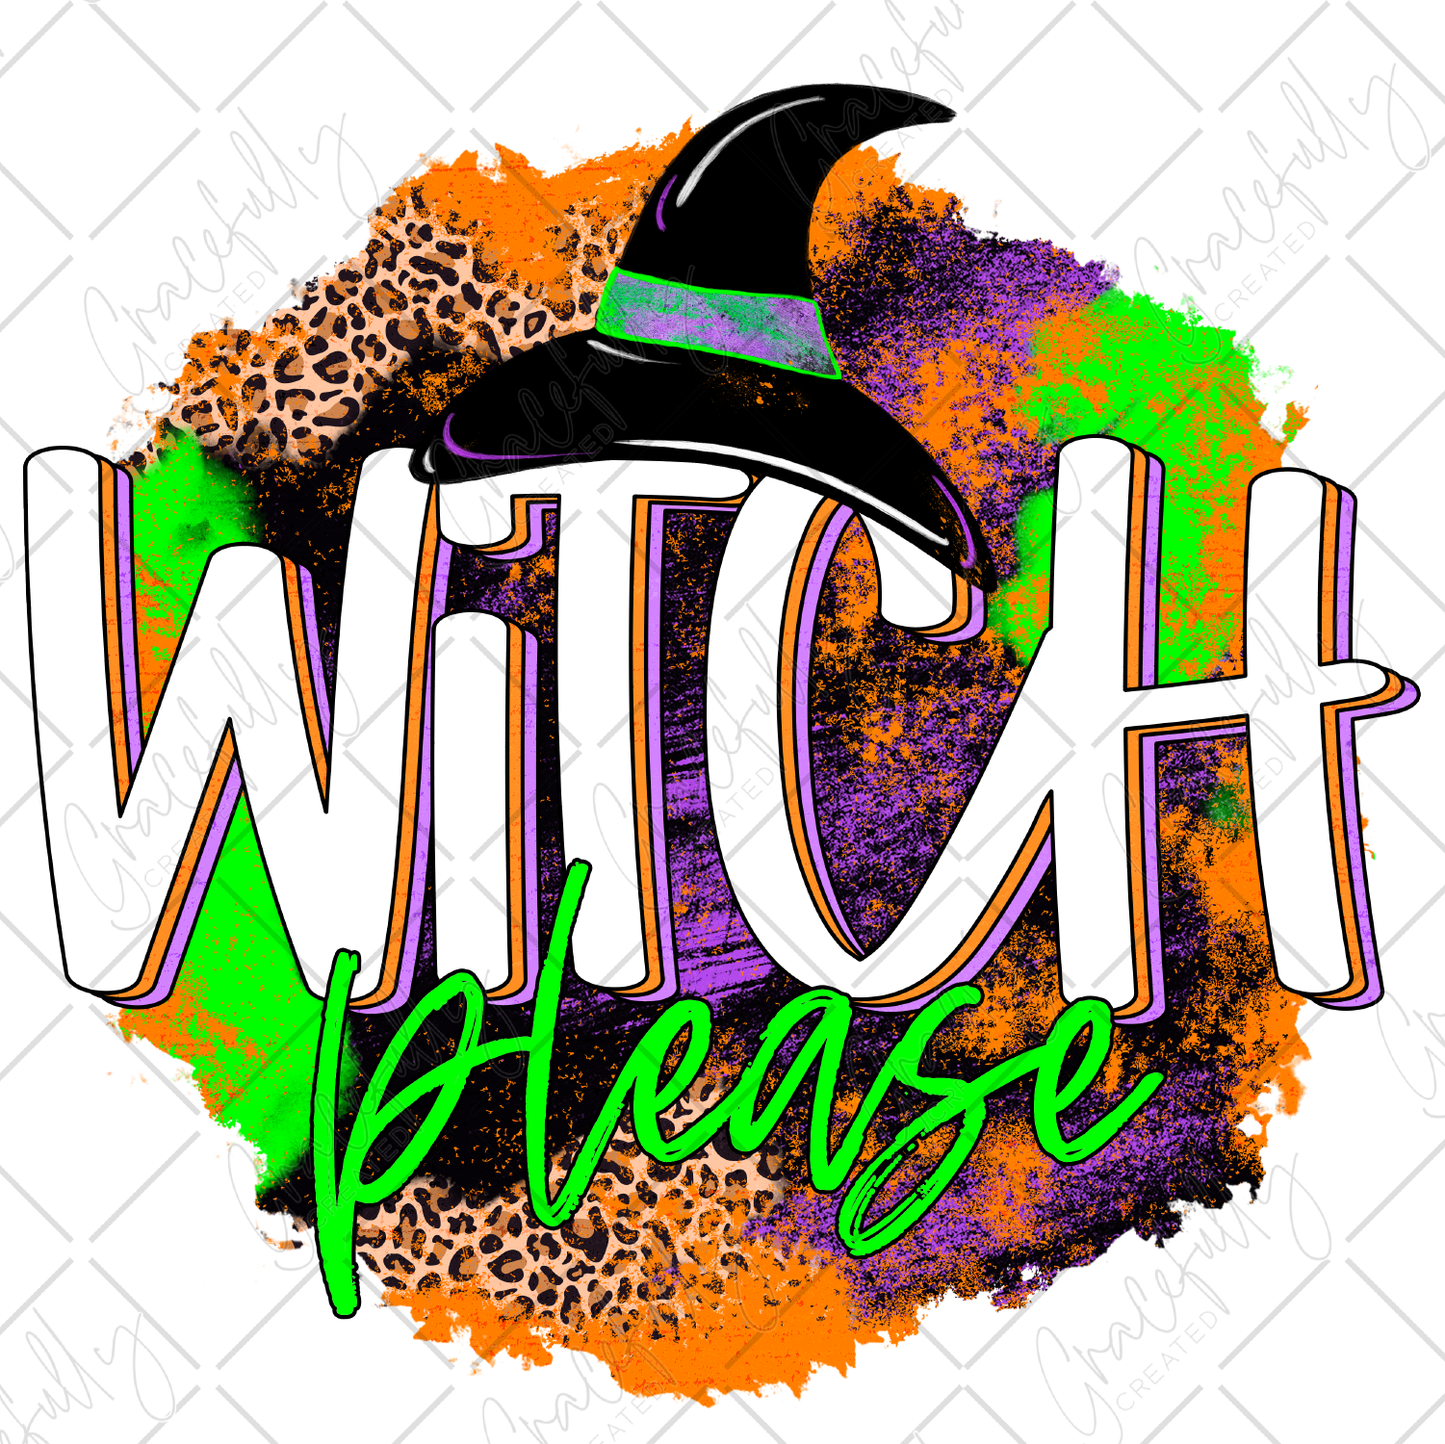 H7 Witch Please